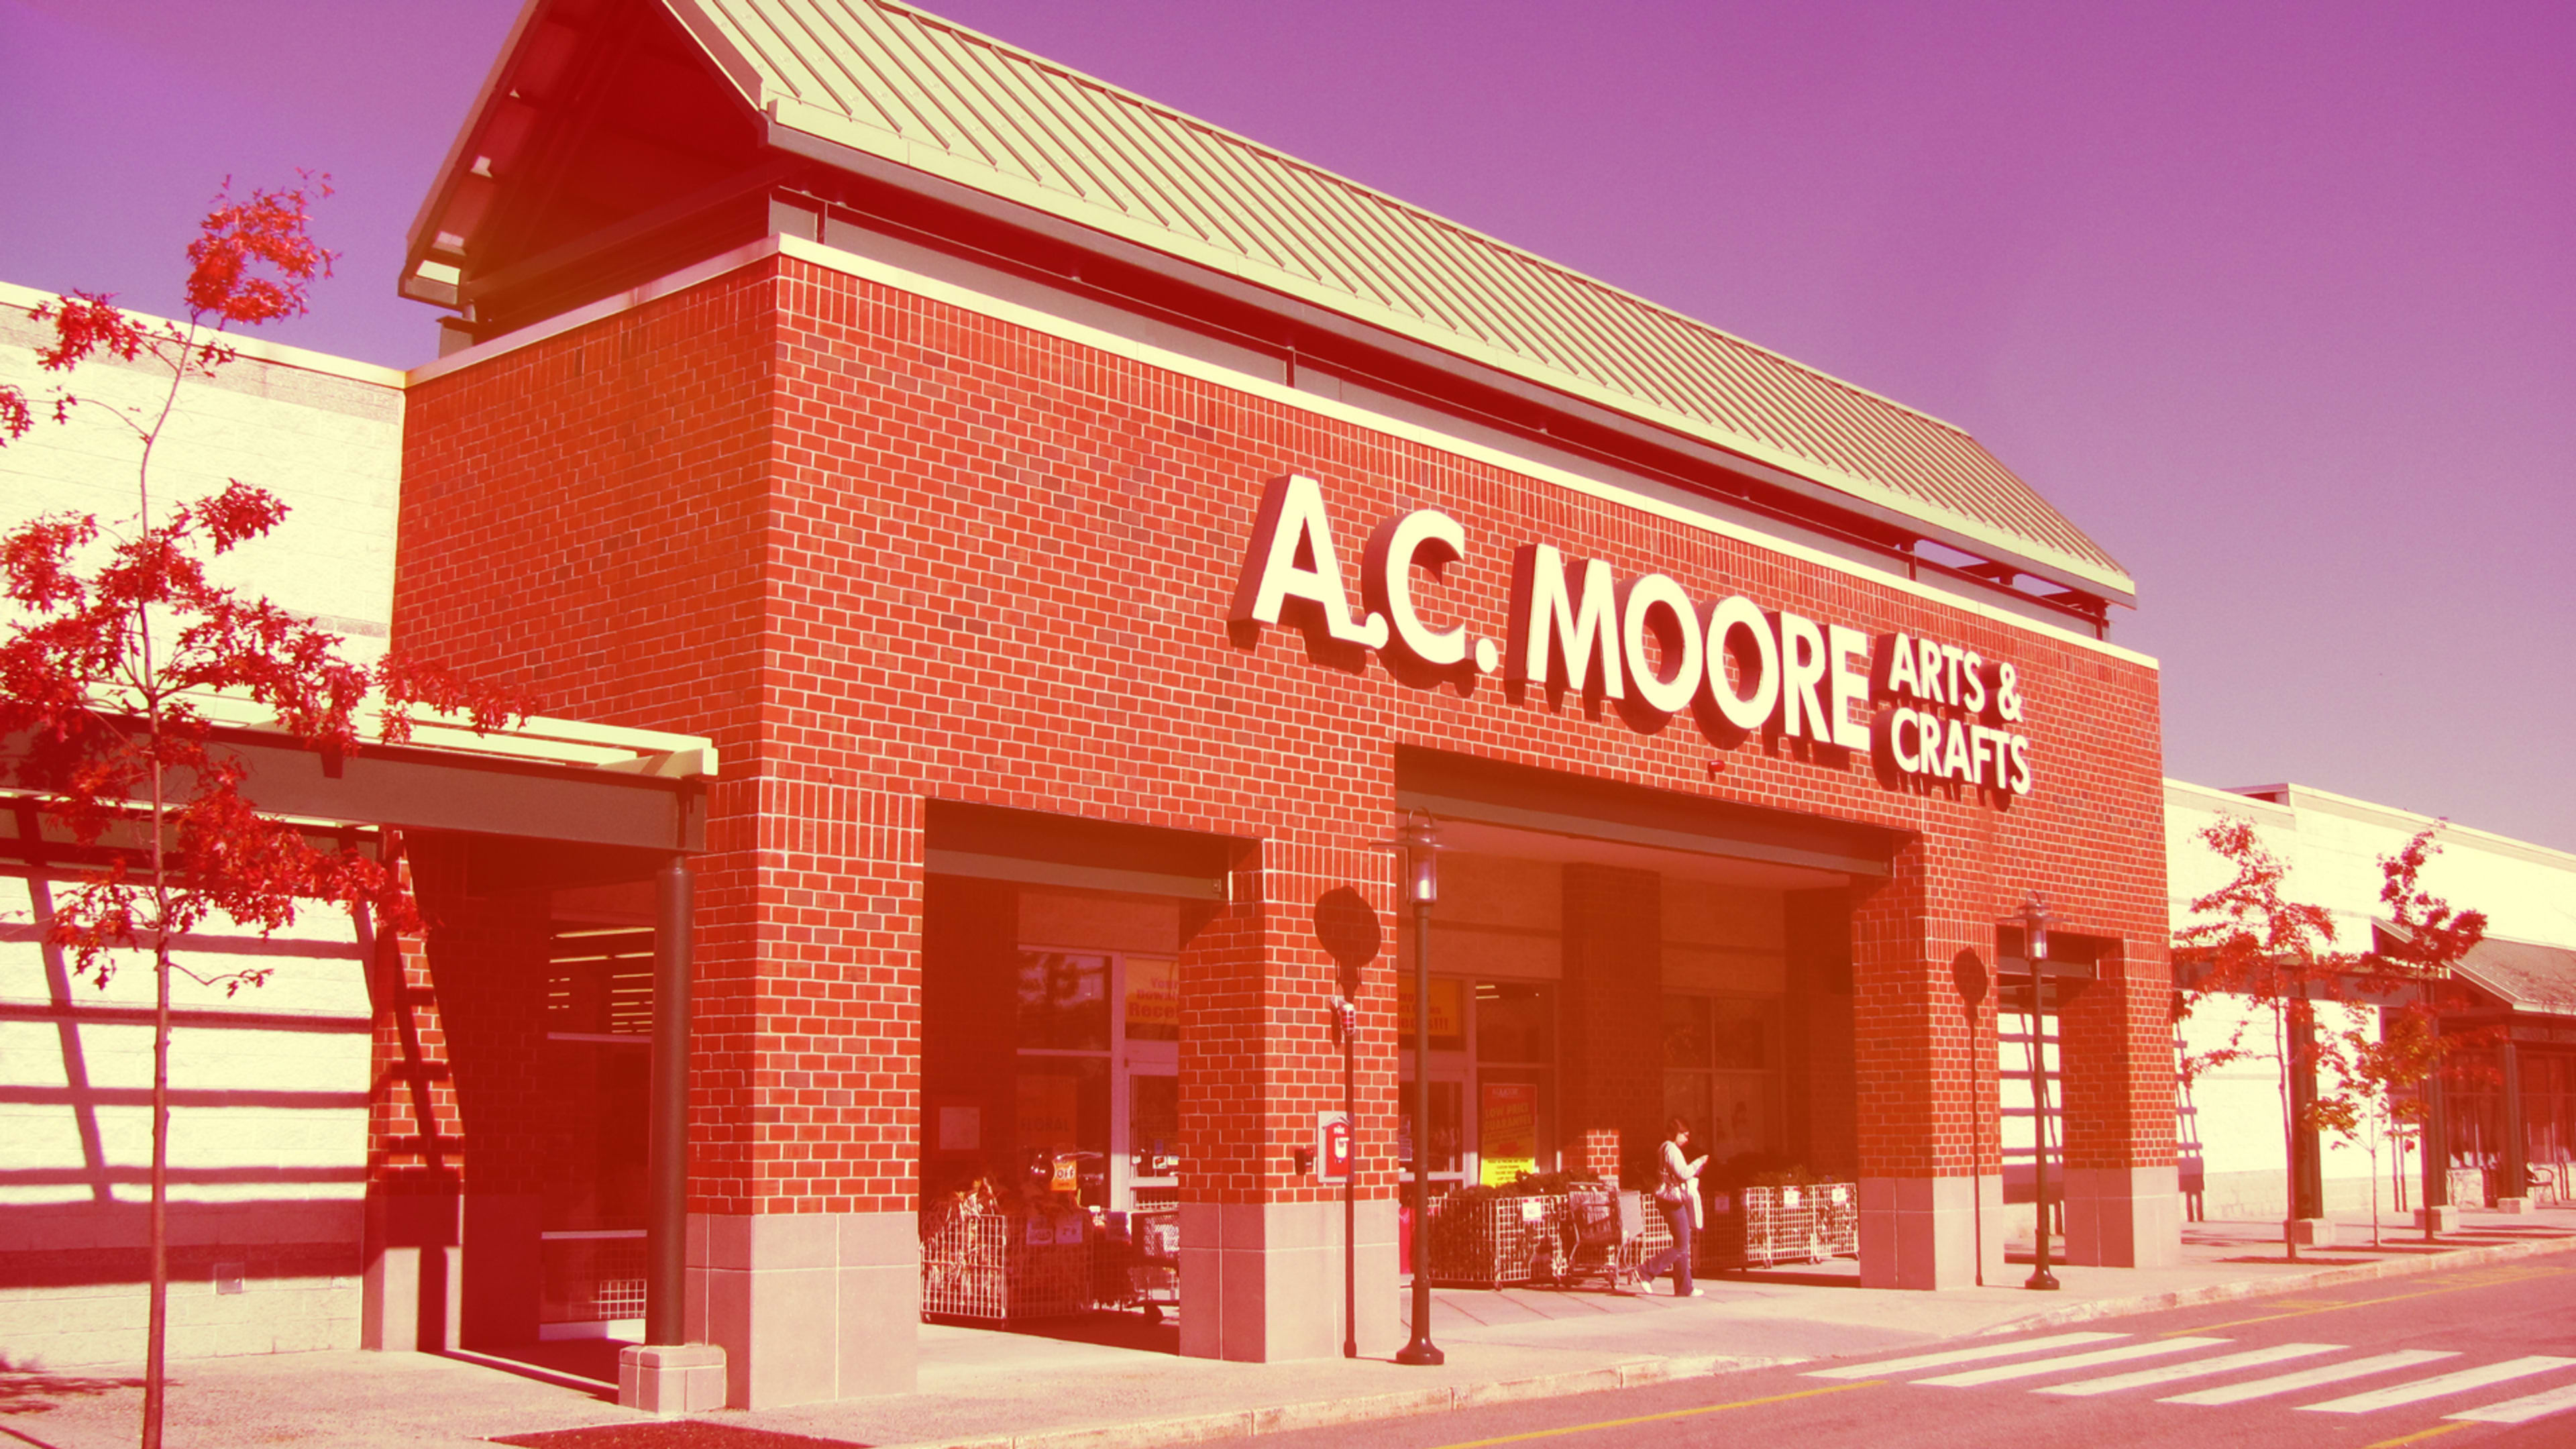 Arts and crafts retailer A.C. Moore is shutting down, Michaels taking over some stores